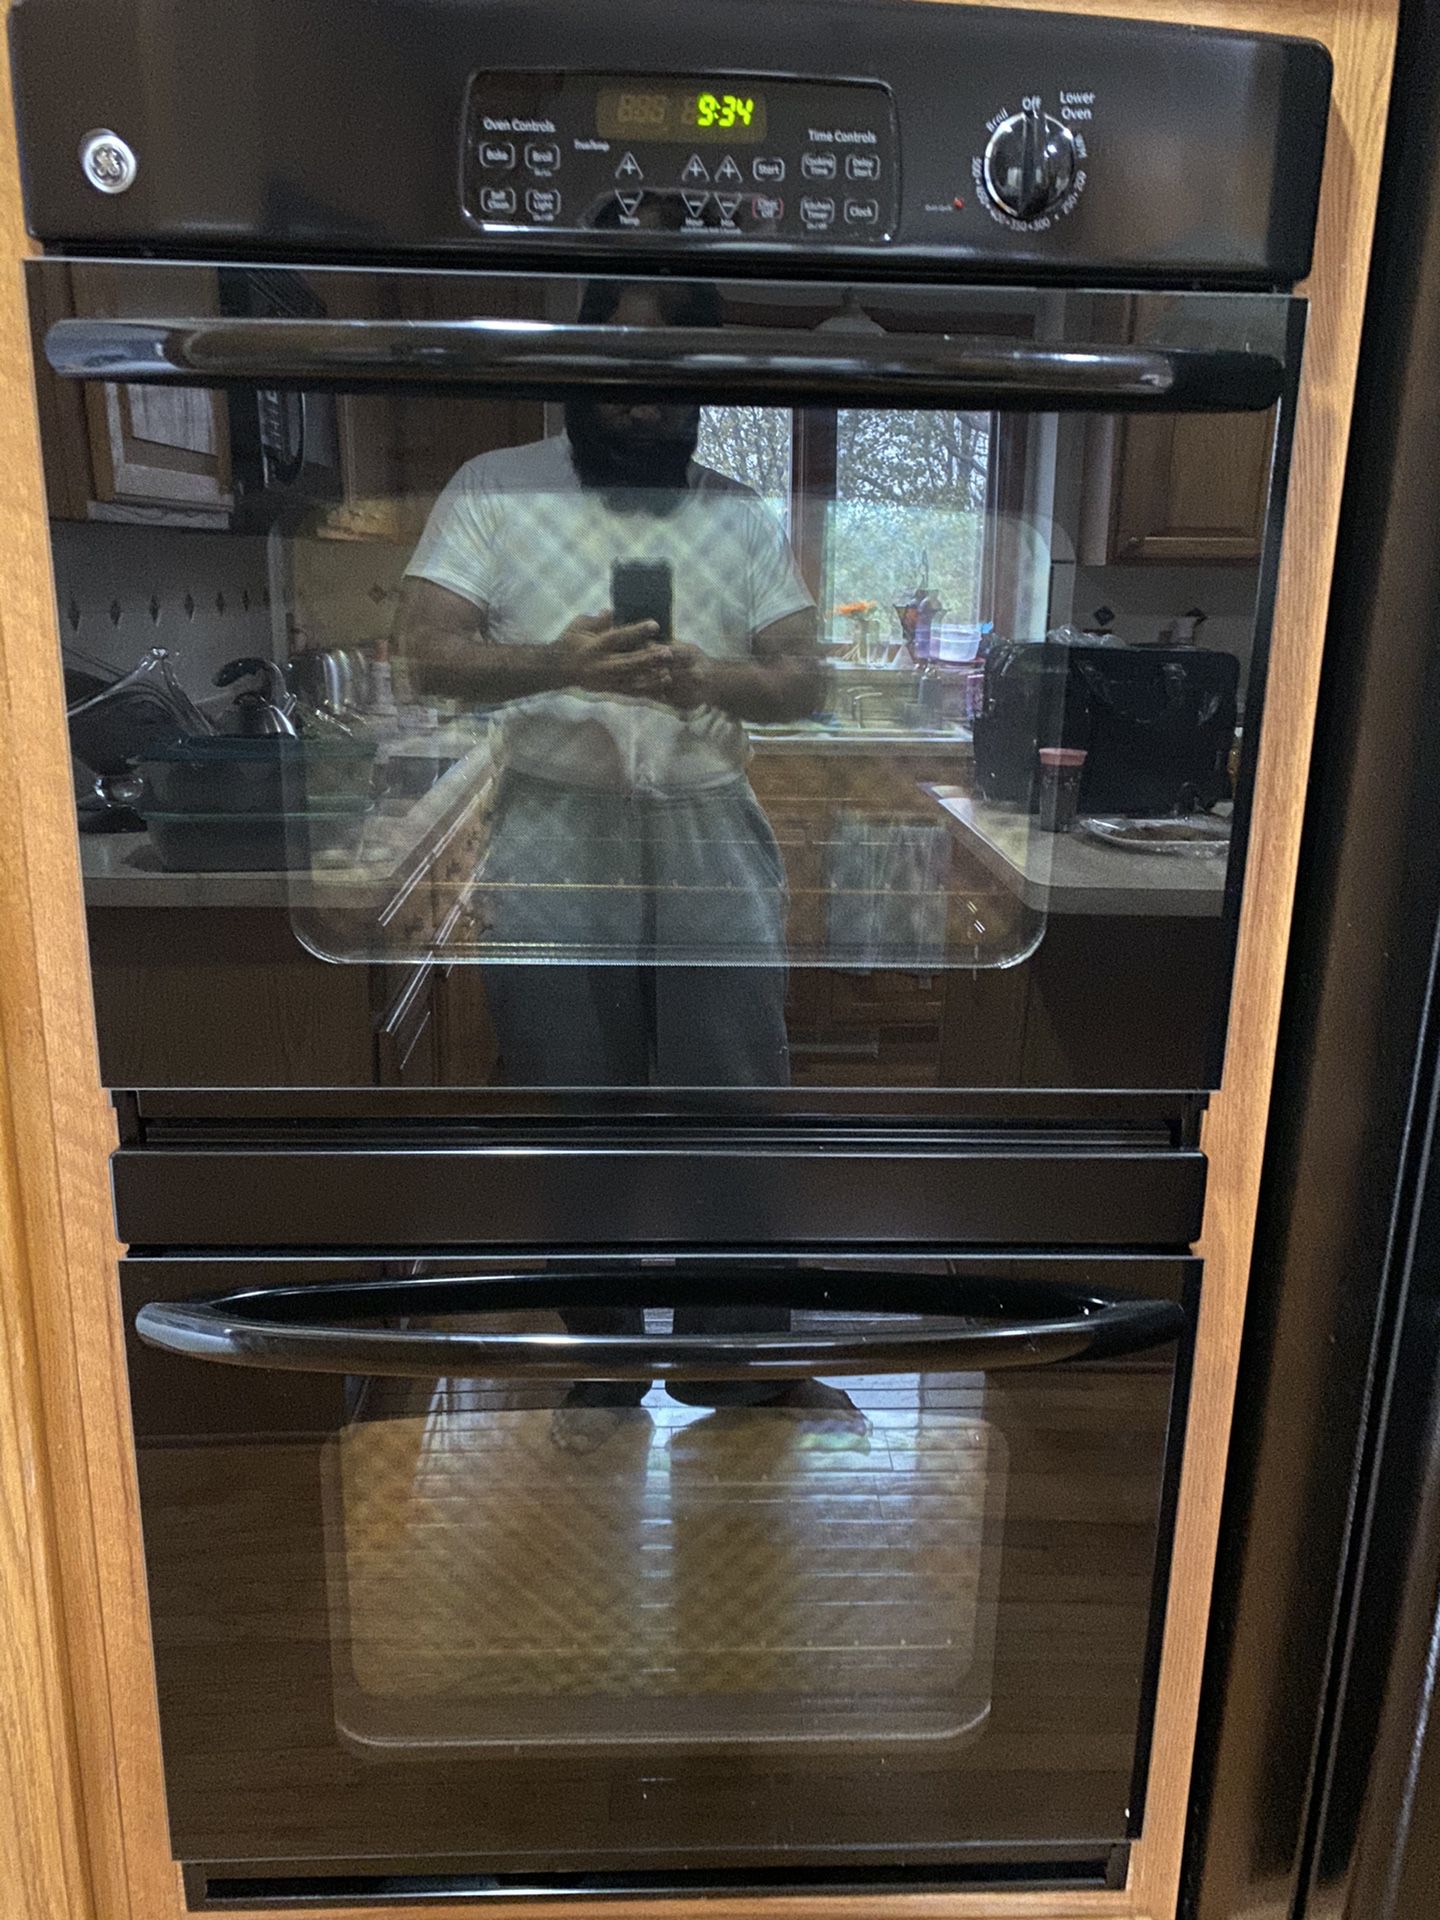 GE 30” electric double oven